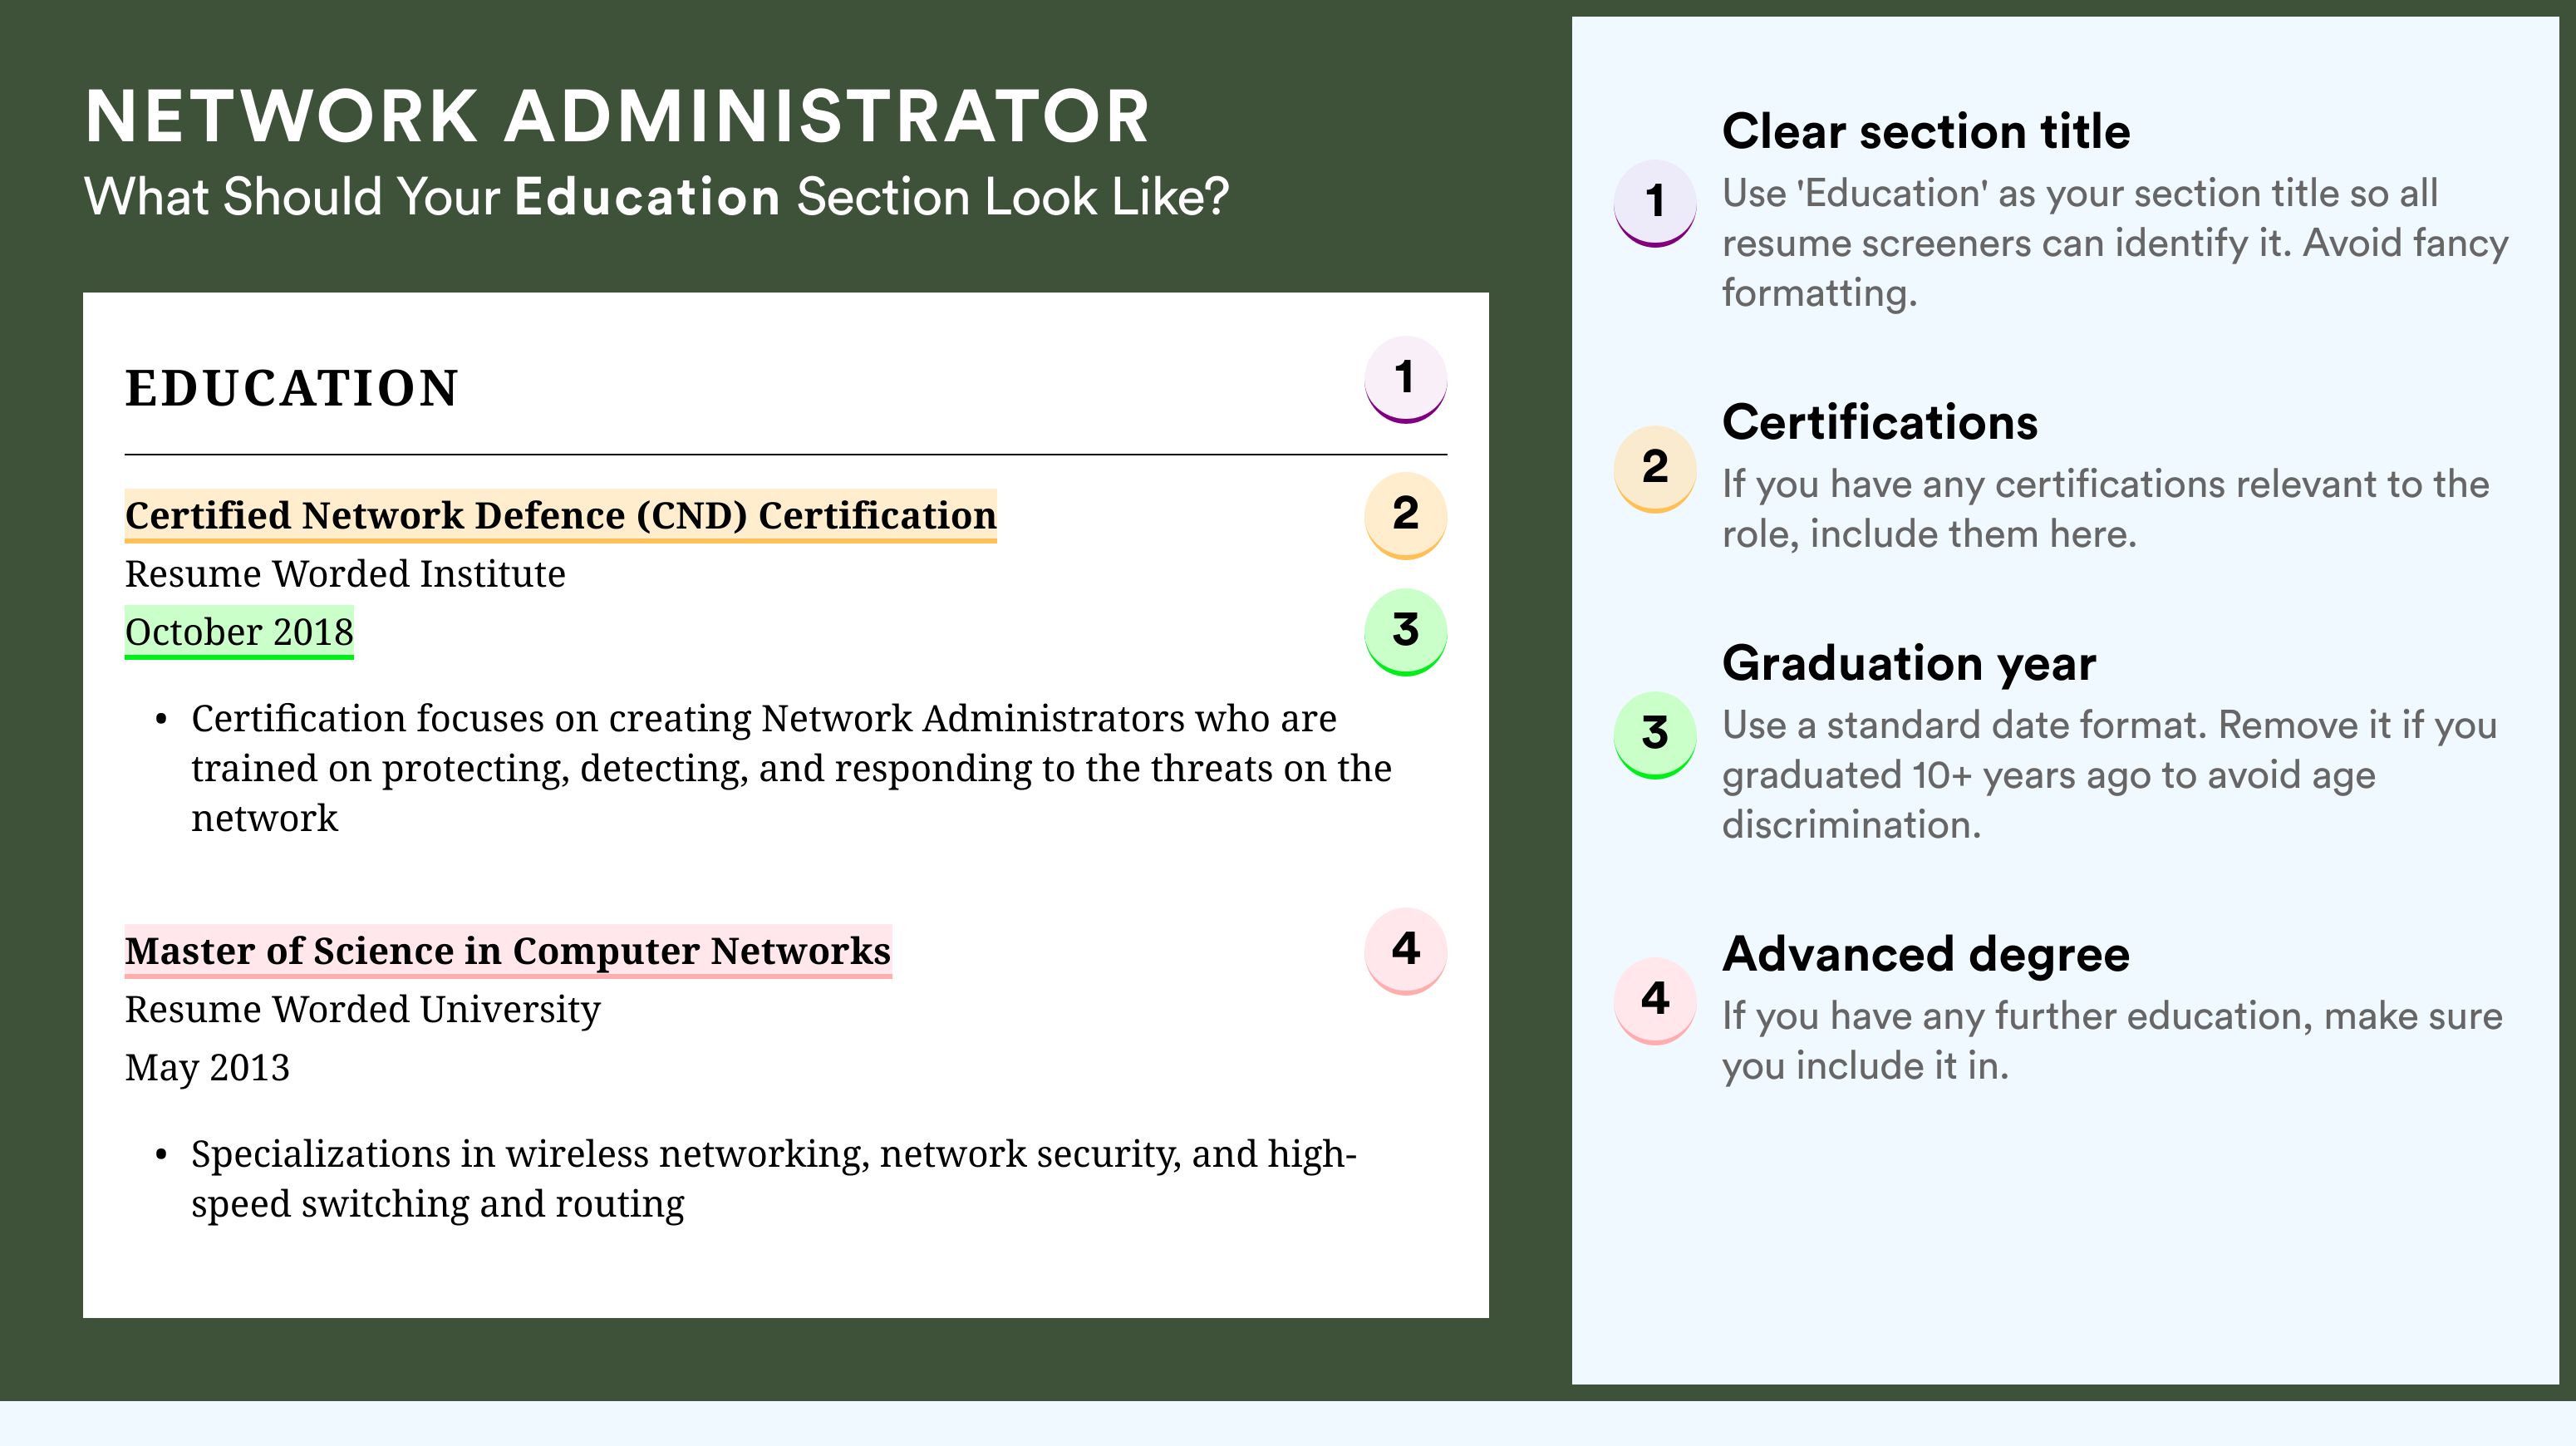 How To Write An Education Section - Network Administrator Roles